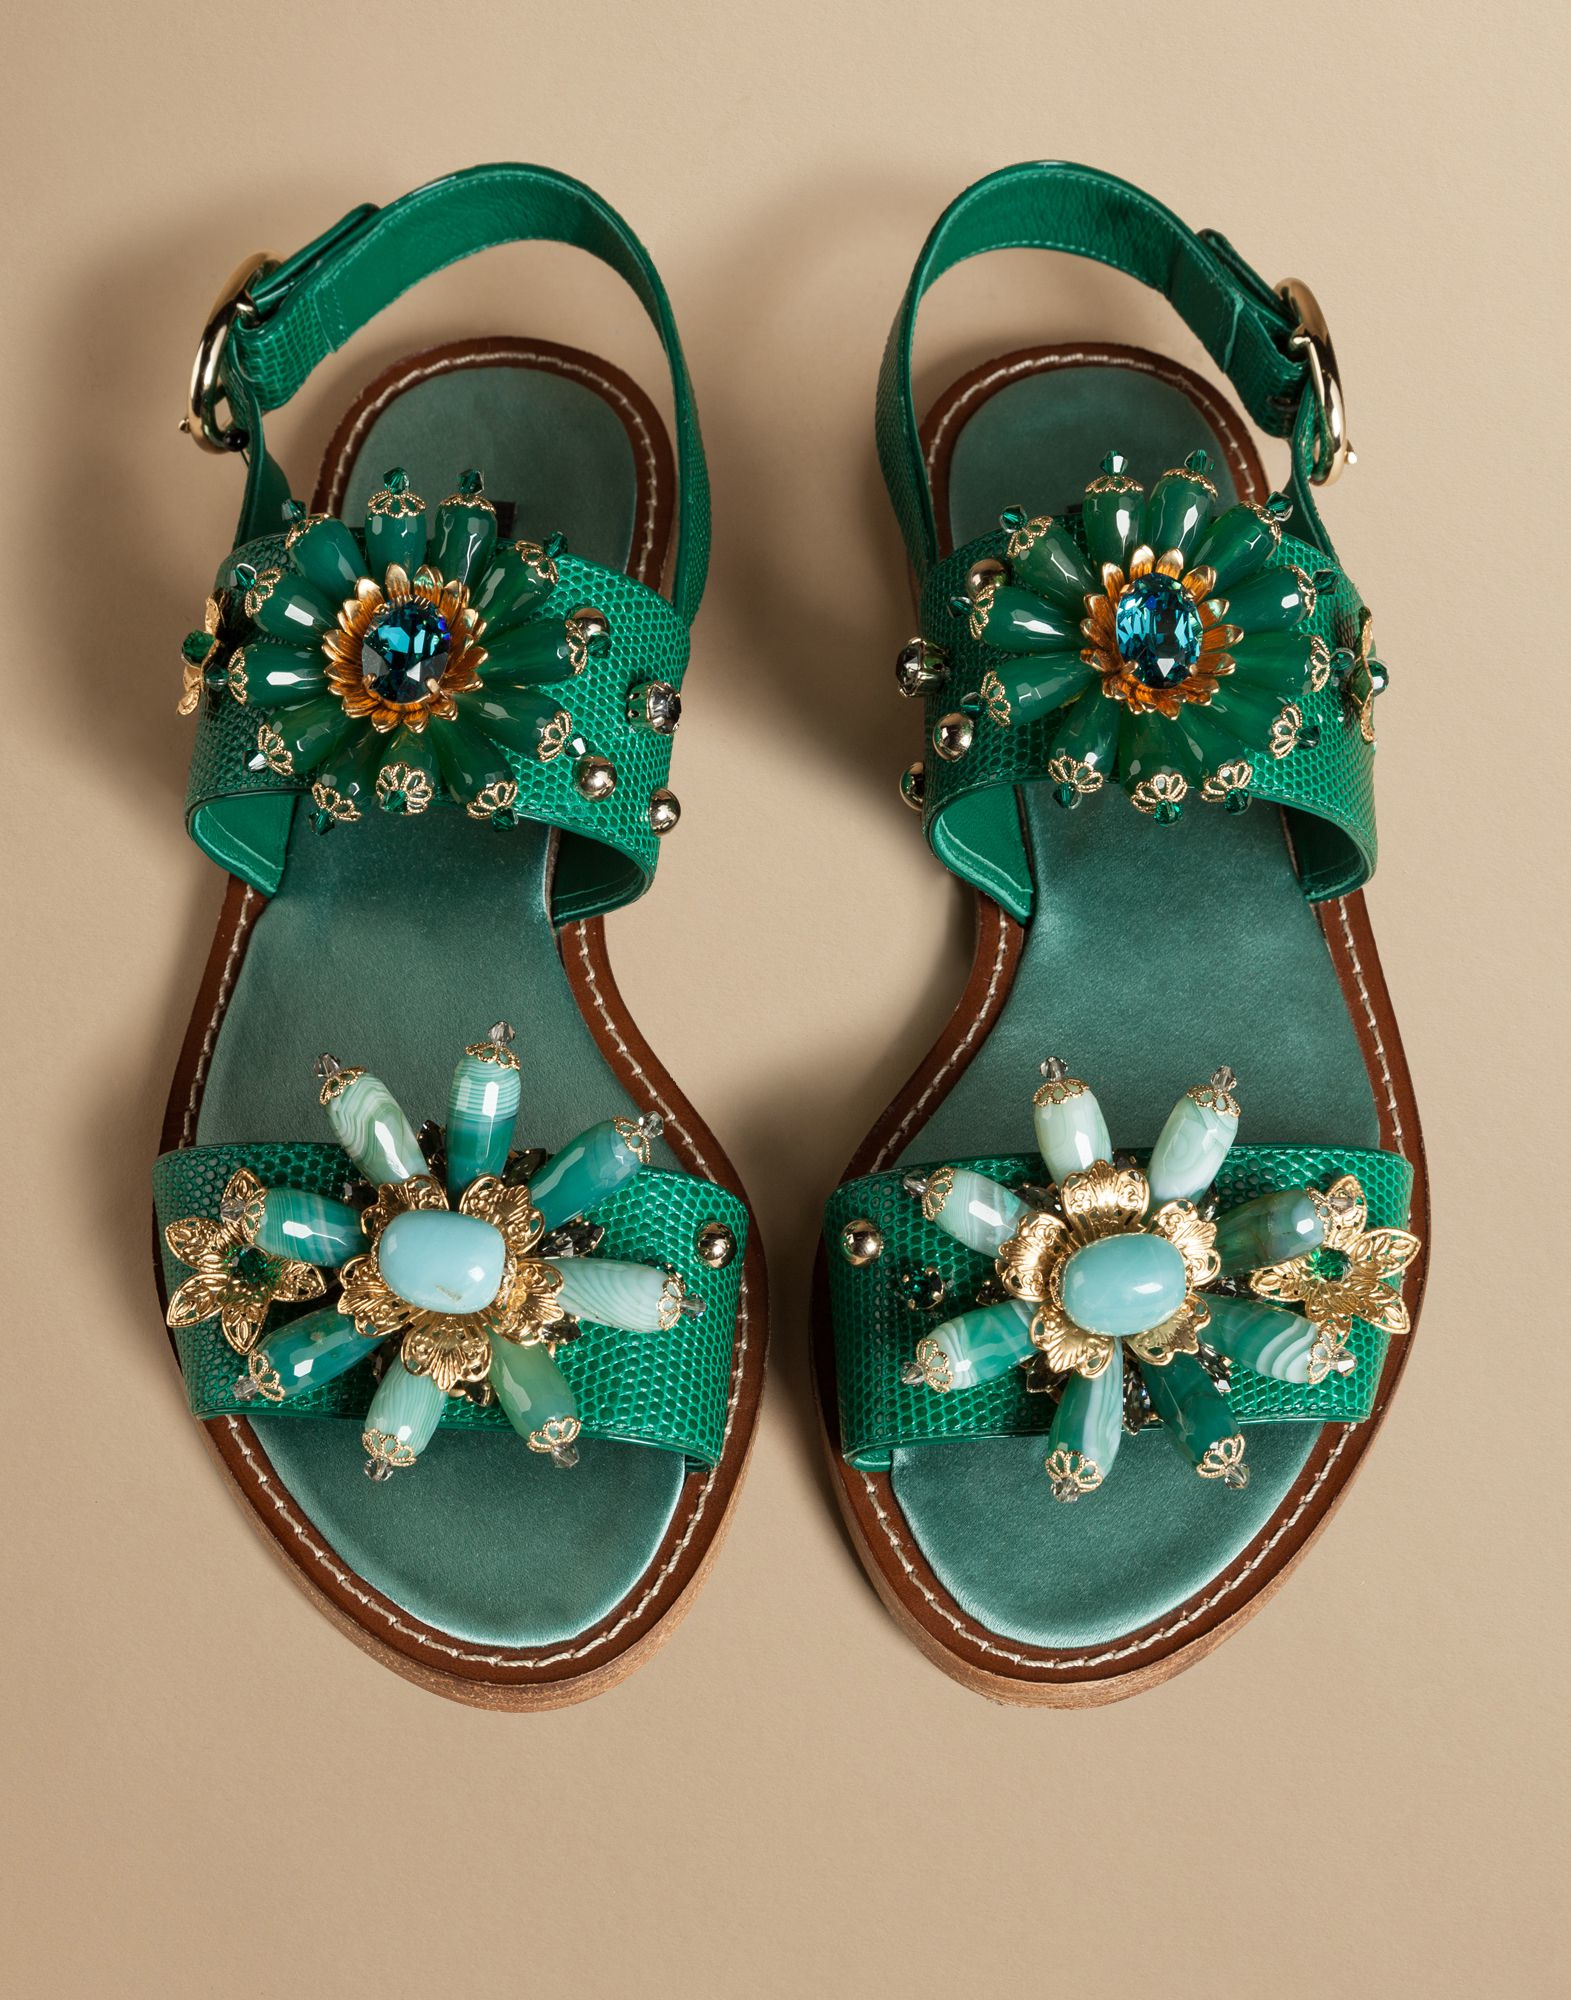 Dolce & Gabbana Flat Sandal In Iguana Print Leather With Stones in 